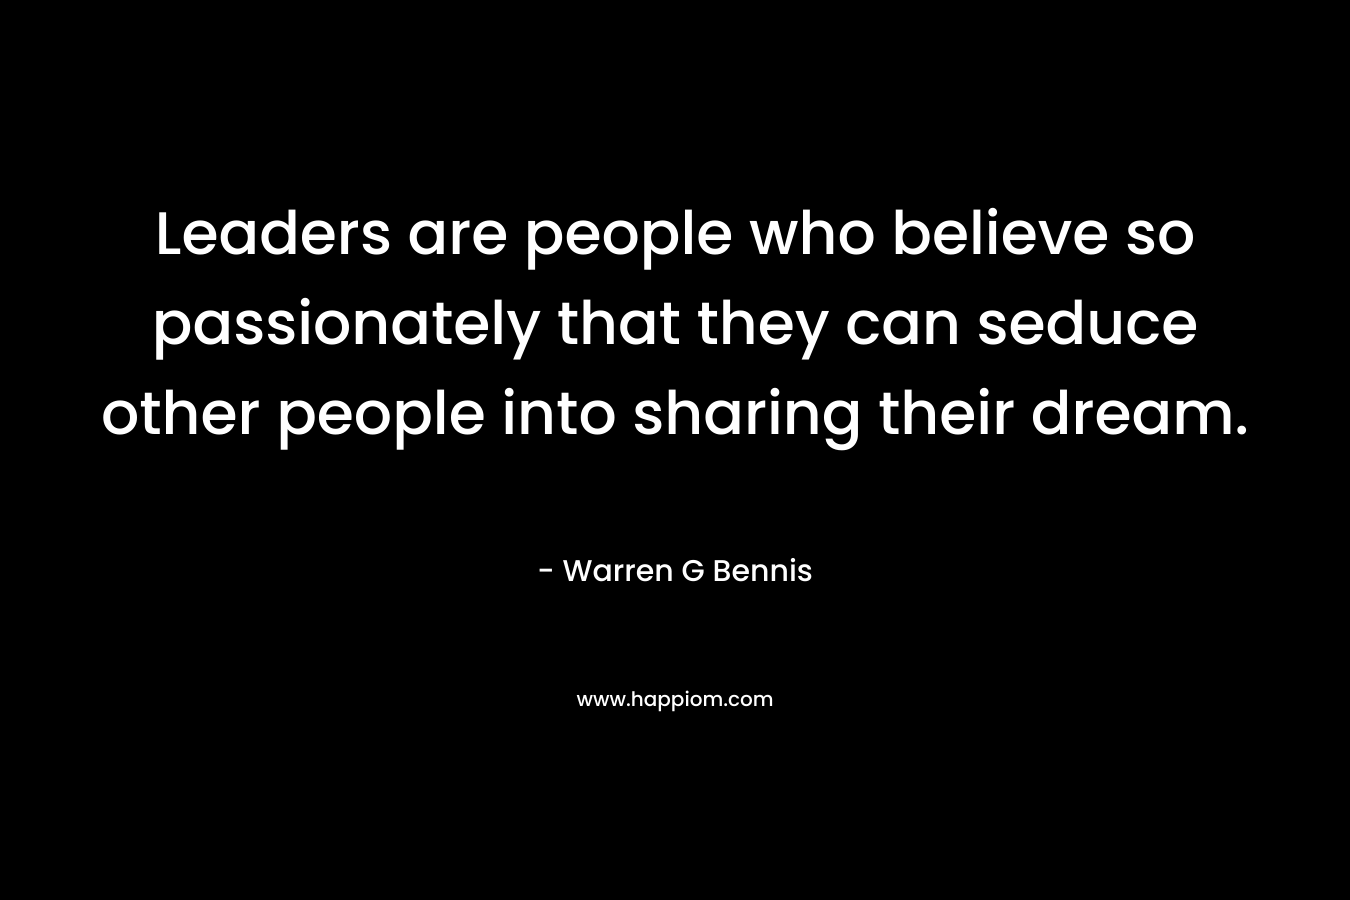 Leaders are people who believe so passionately that they can seduce other people into sharing their dream.